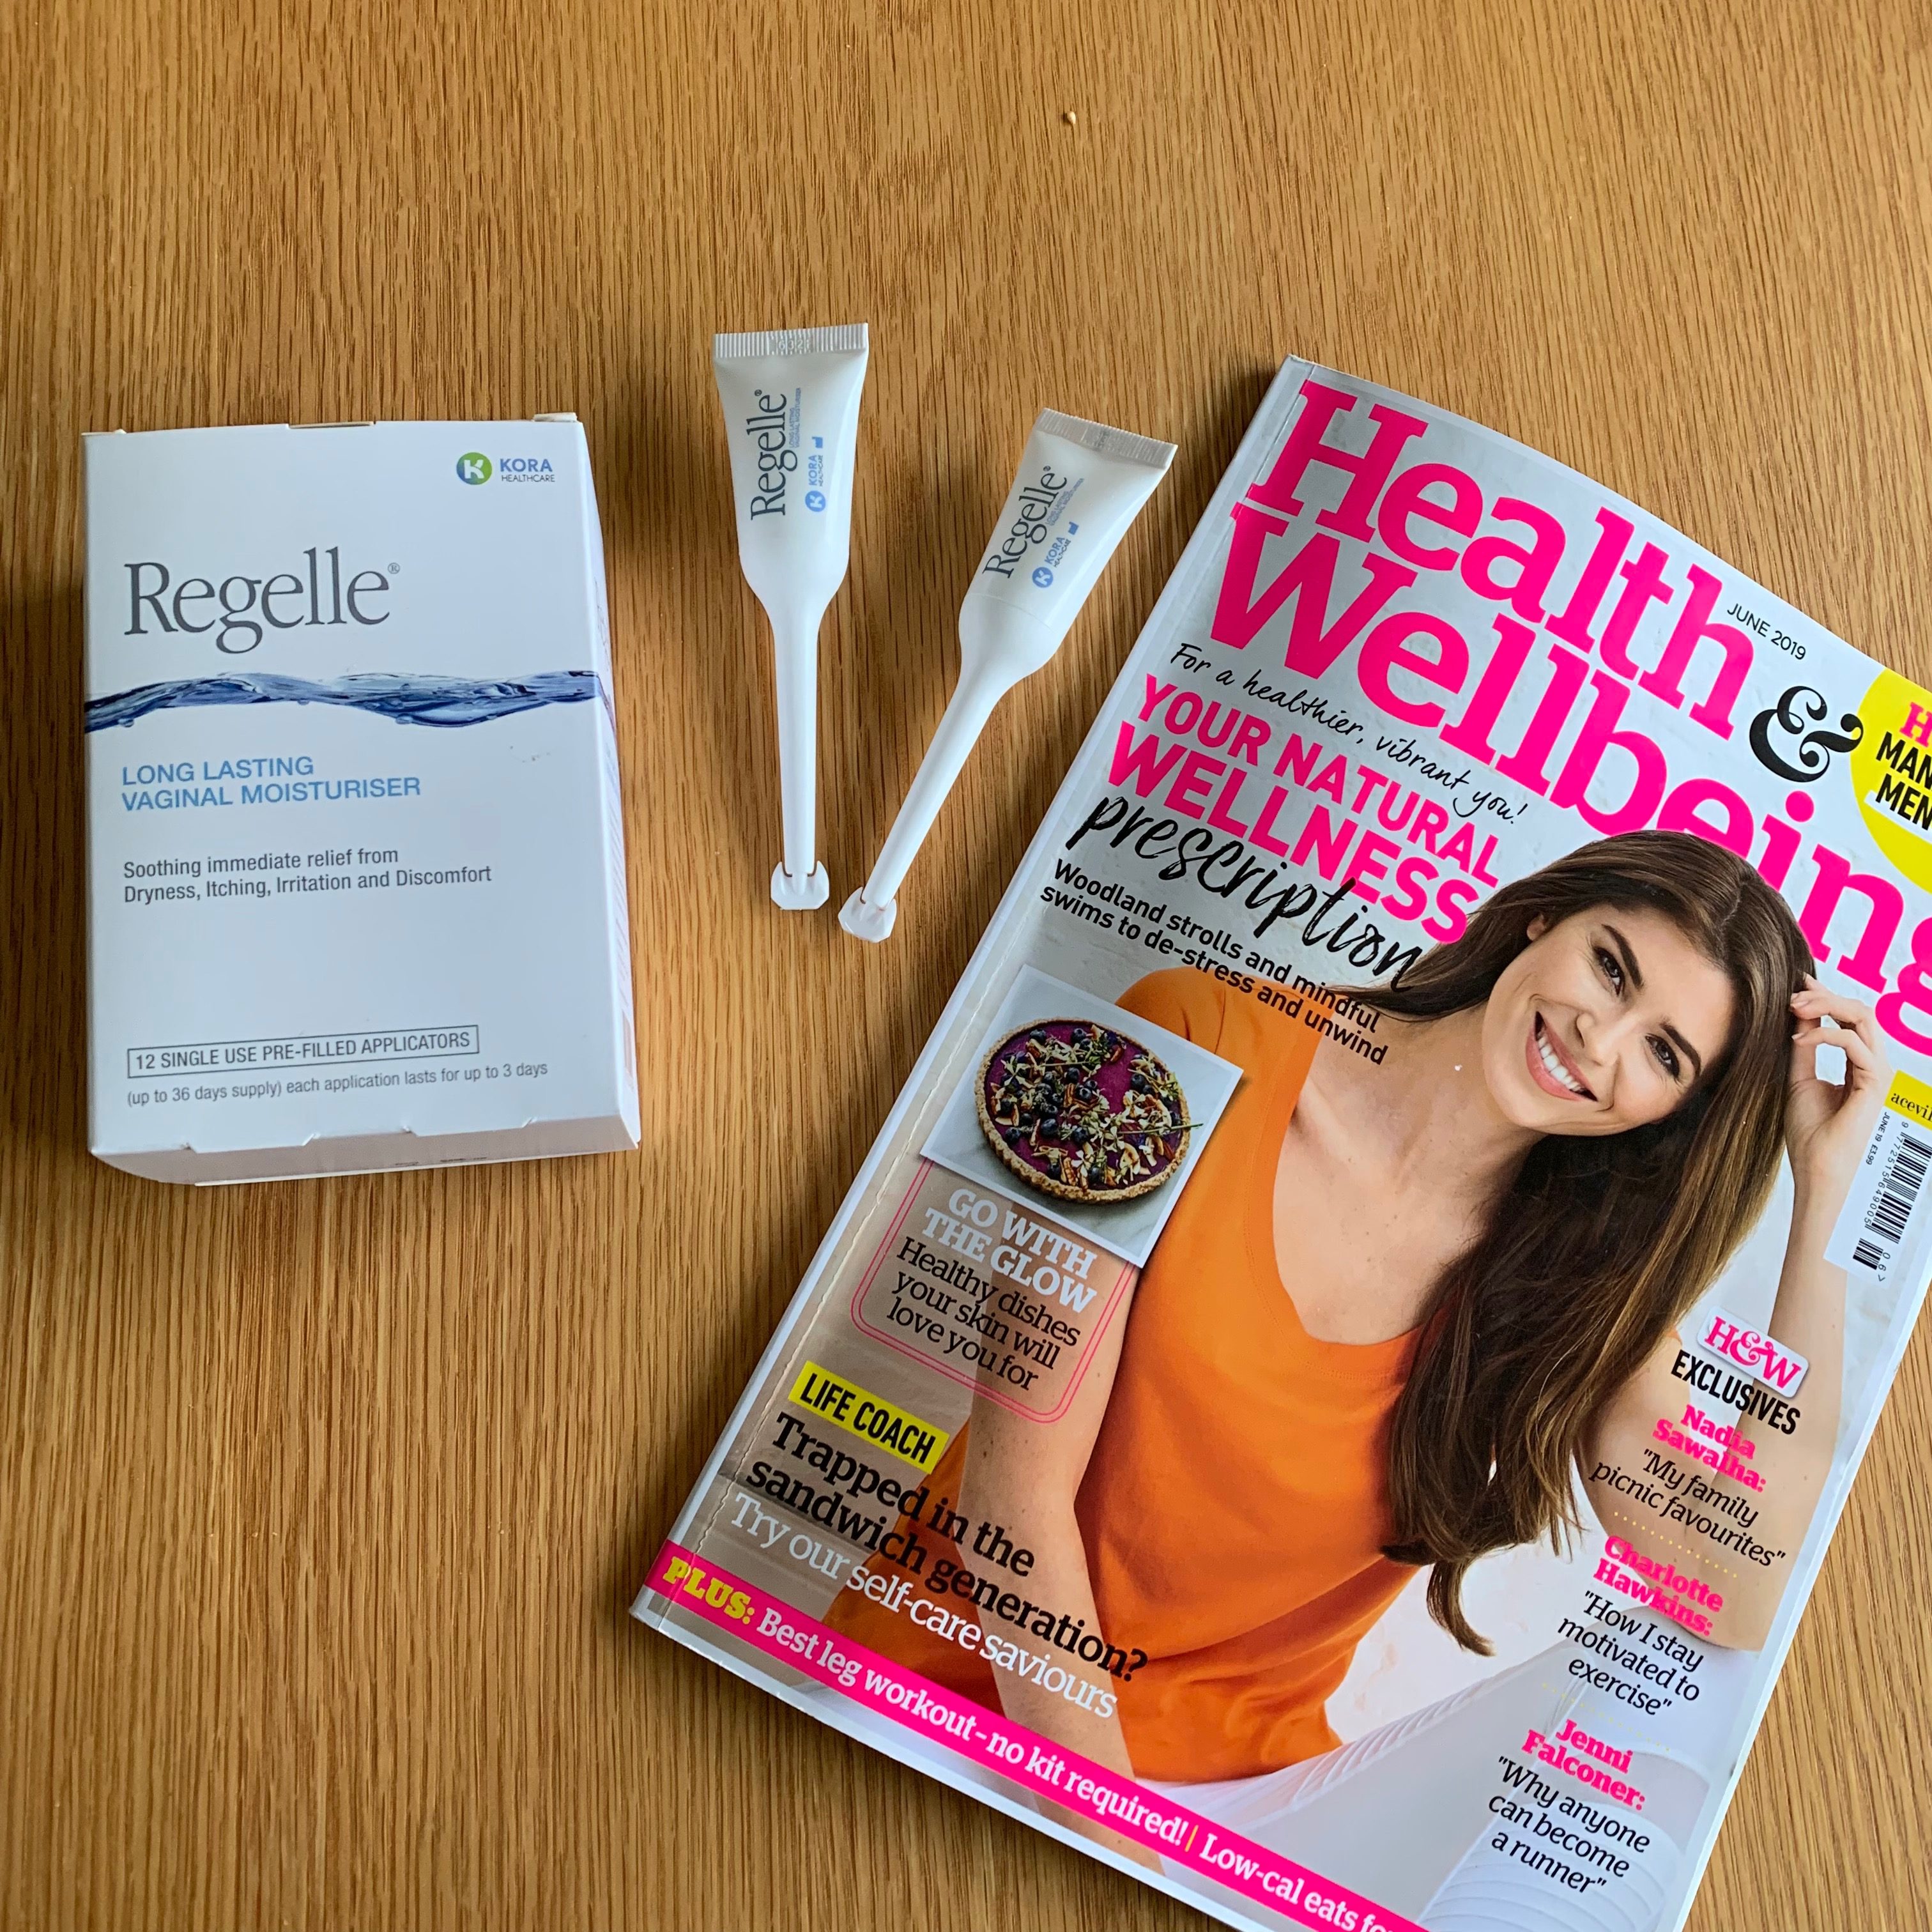 Regelle Health and Wellbeing